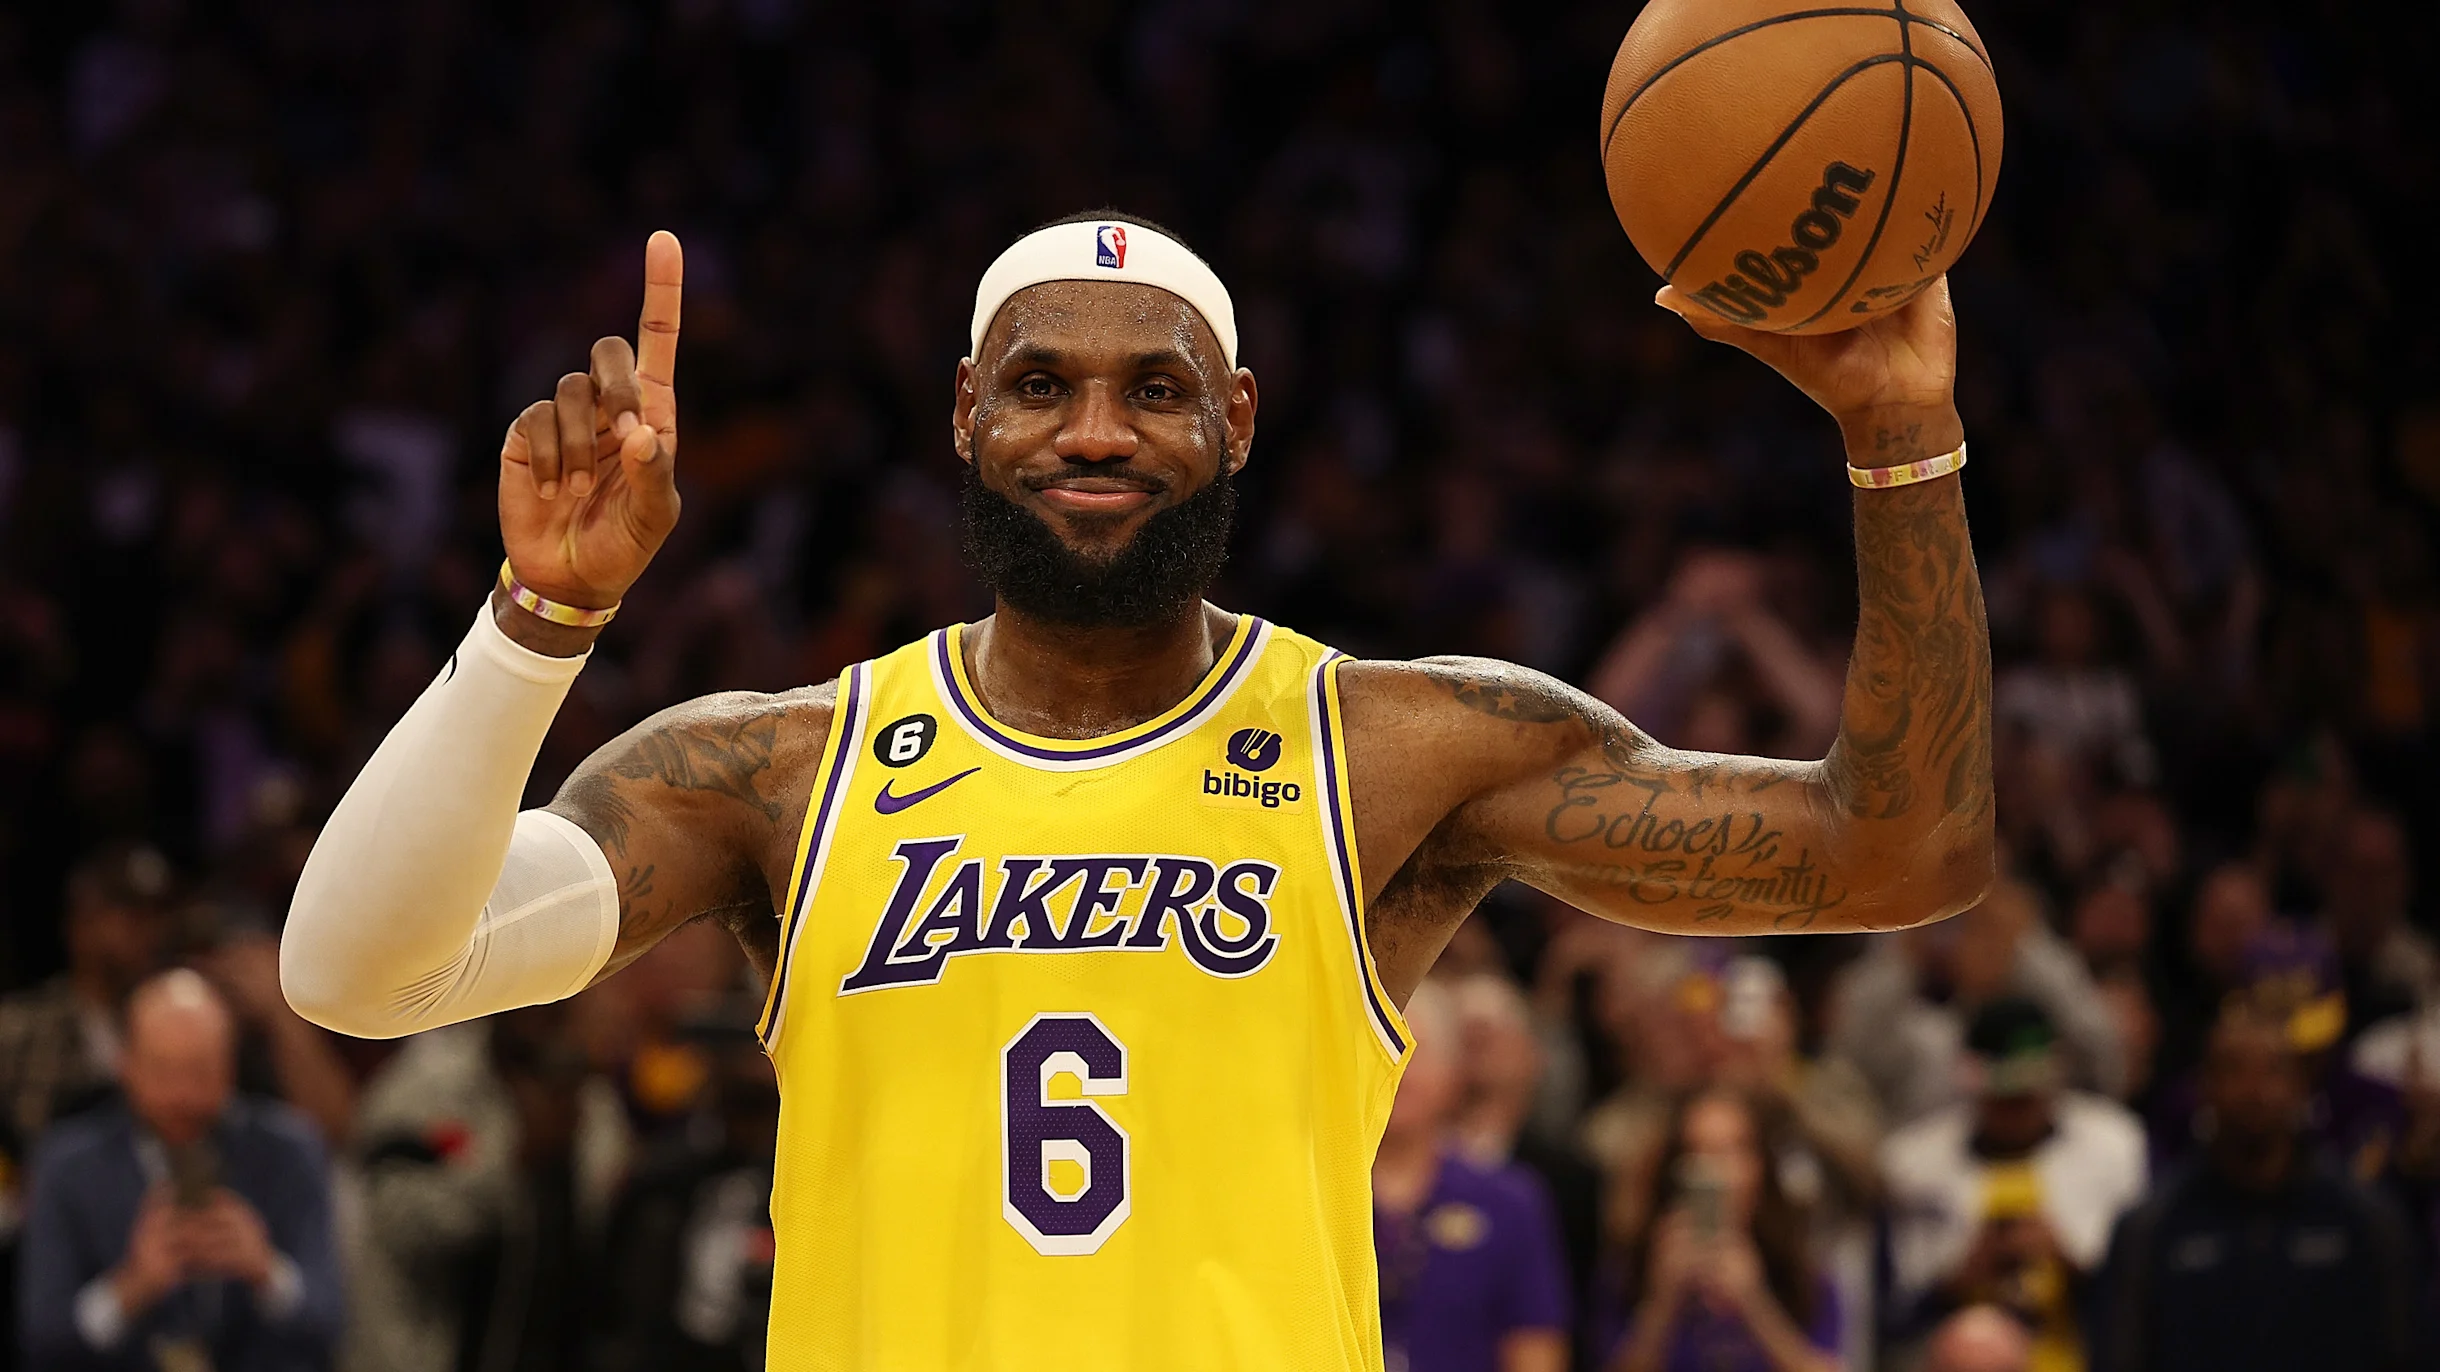 LeBron James Shuts Down Warriors Trade Talk: The Inside Scoop on the NBA's Hottest Rumor